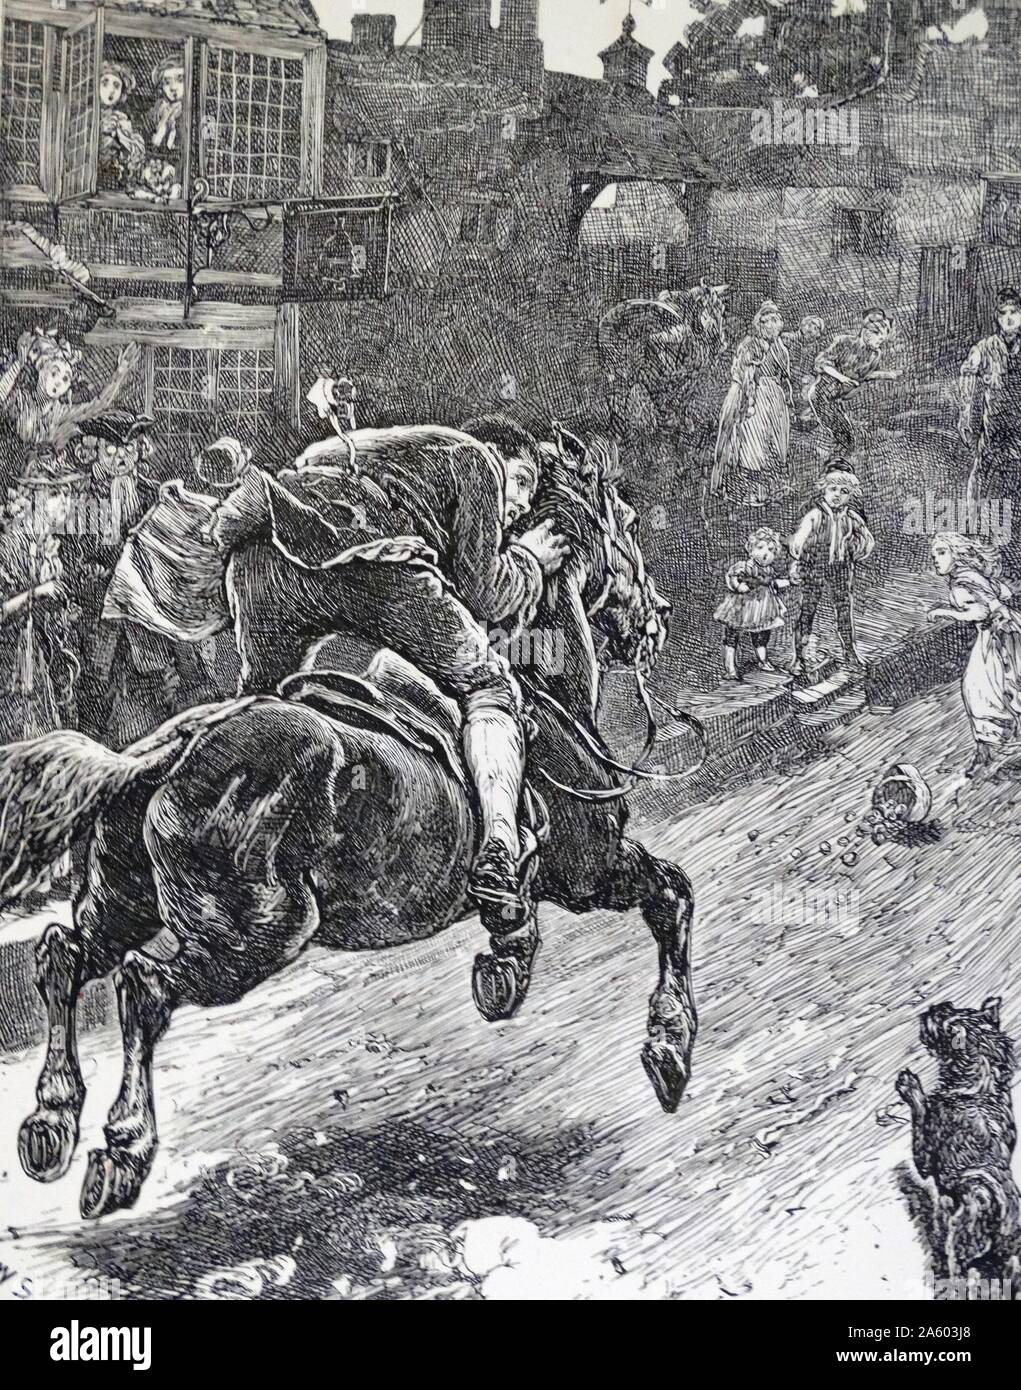 Illustration depicting a 18th century messenger racing by horseback through a street Stock Photo